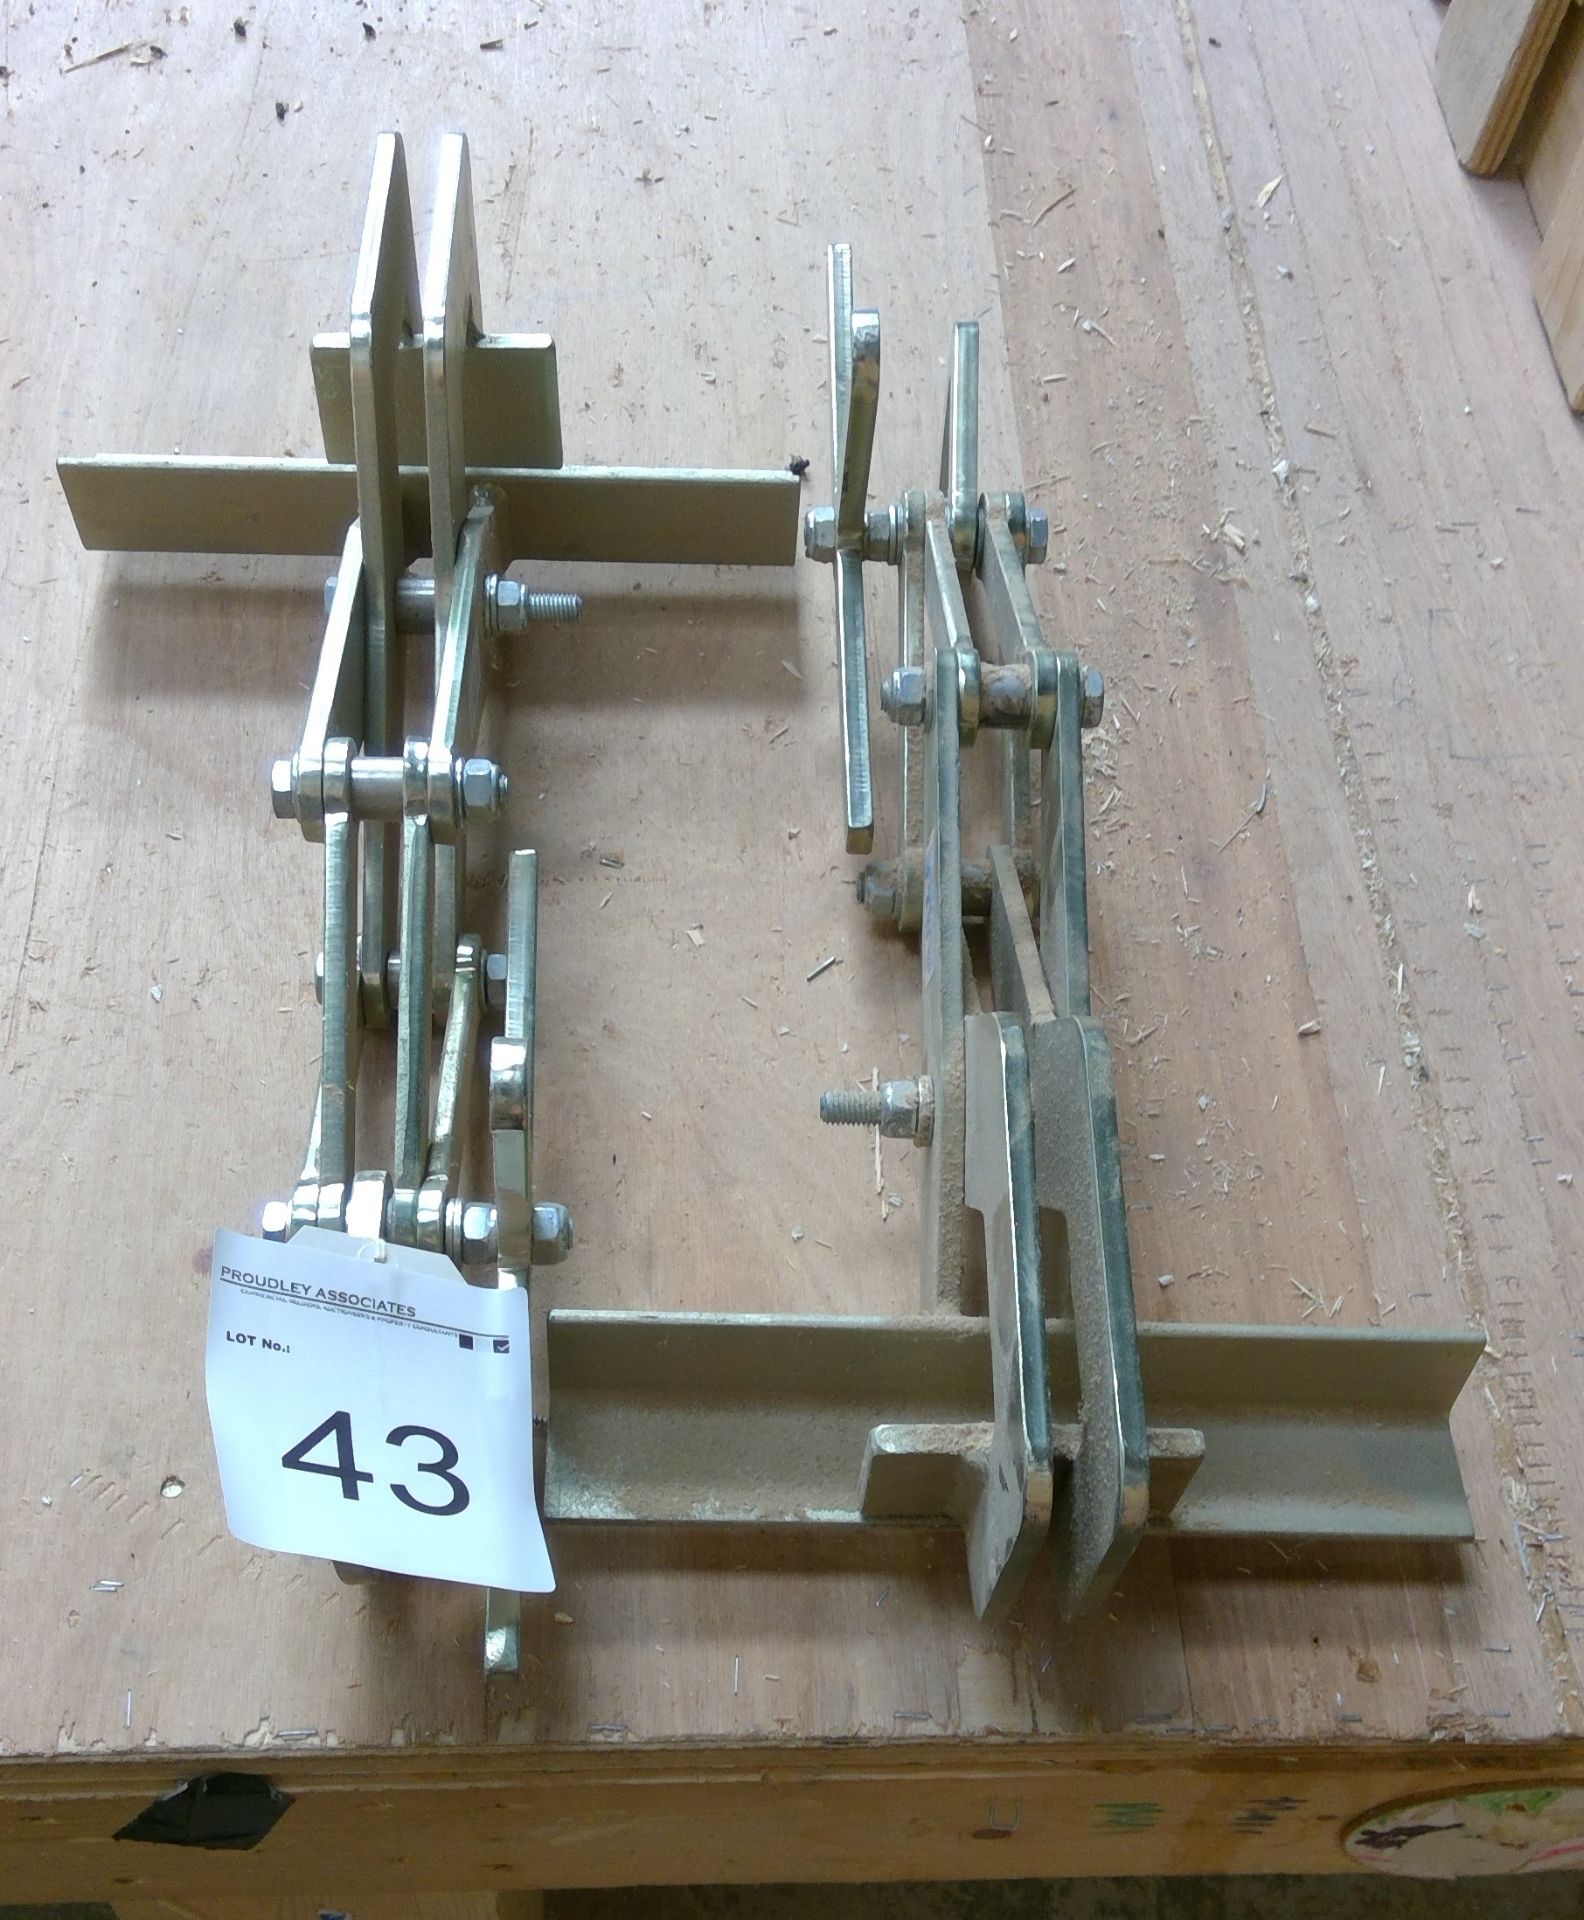 2 No. Able Lifting Equipment 250 Kg board lifting clamps